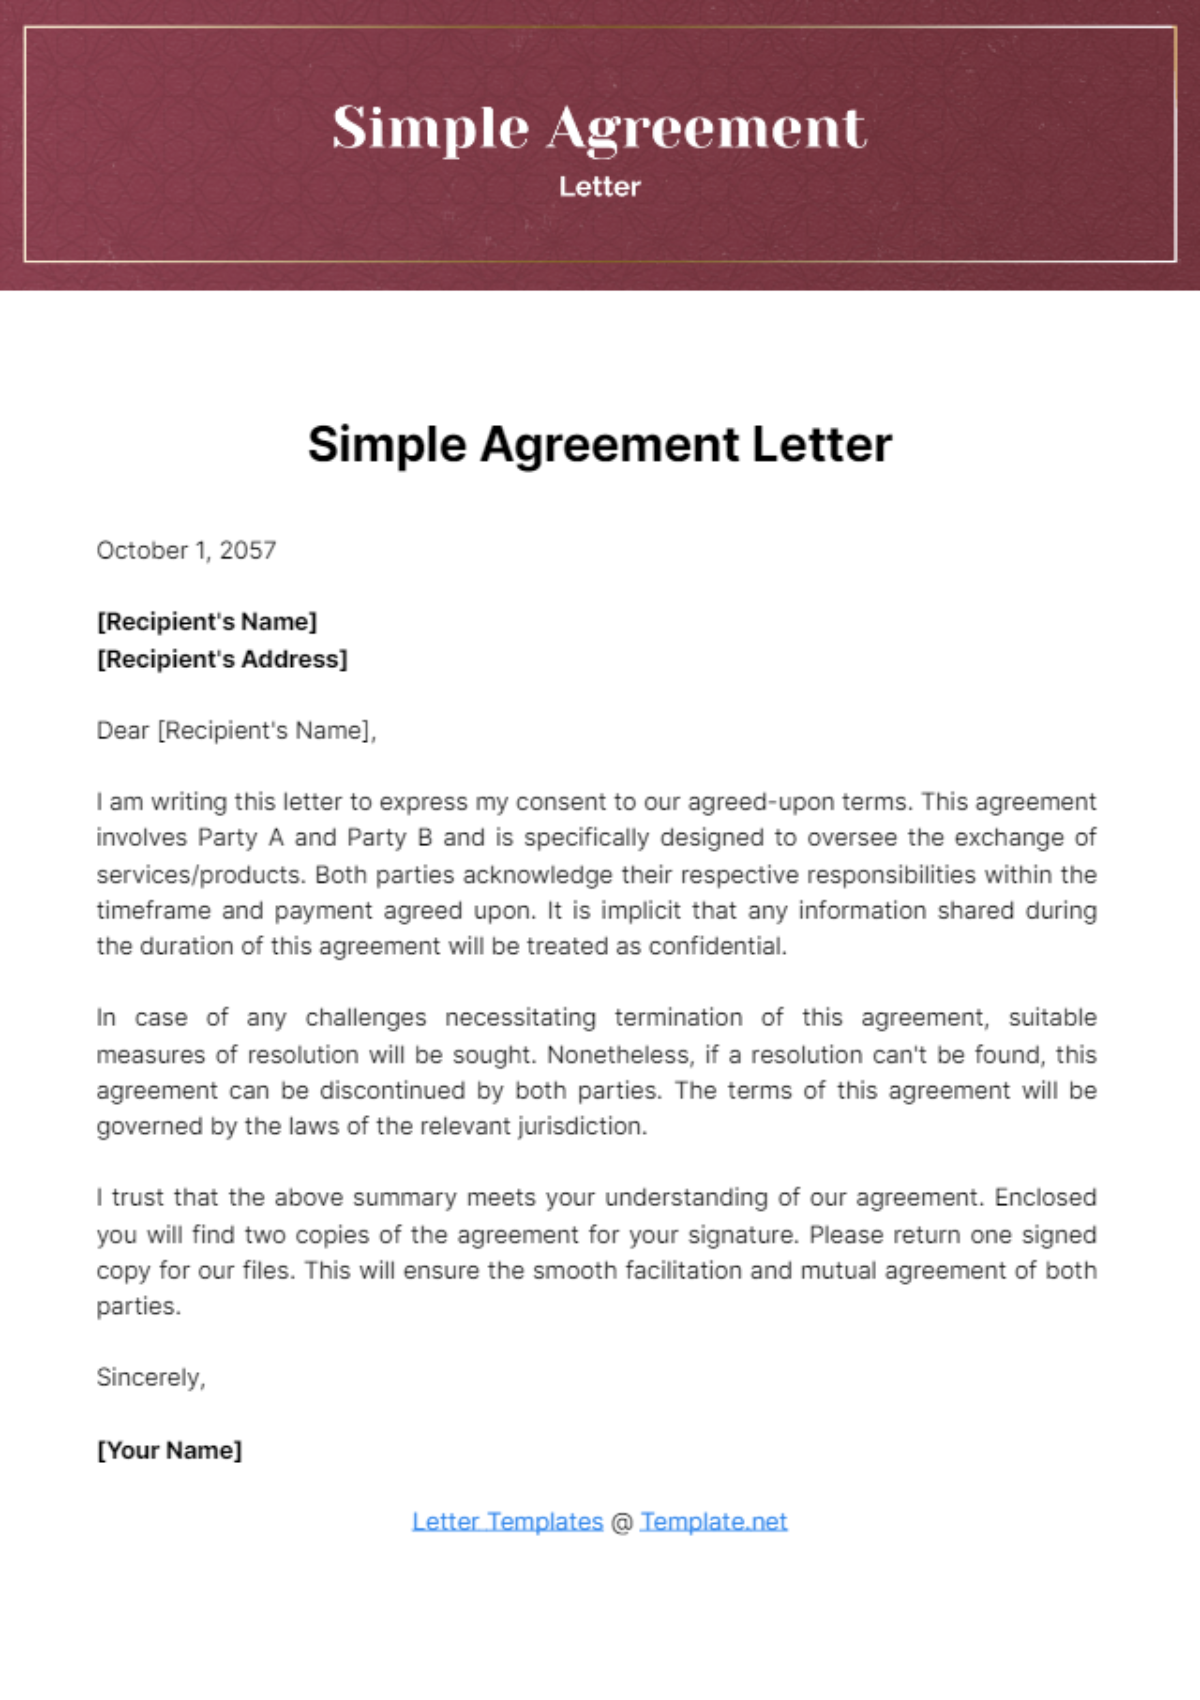 Free Simple Agreement Letter Template